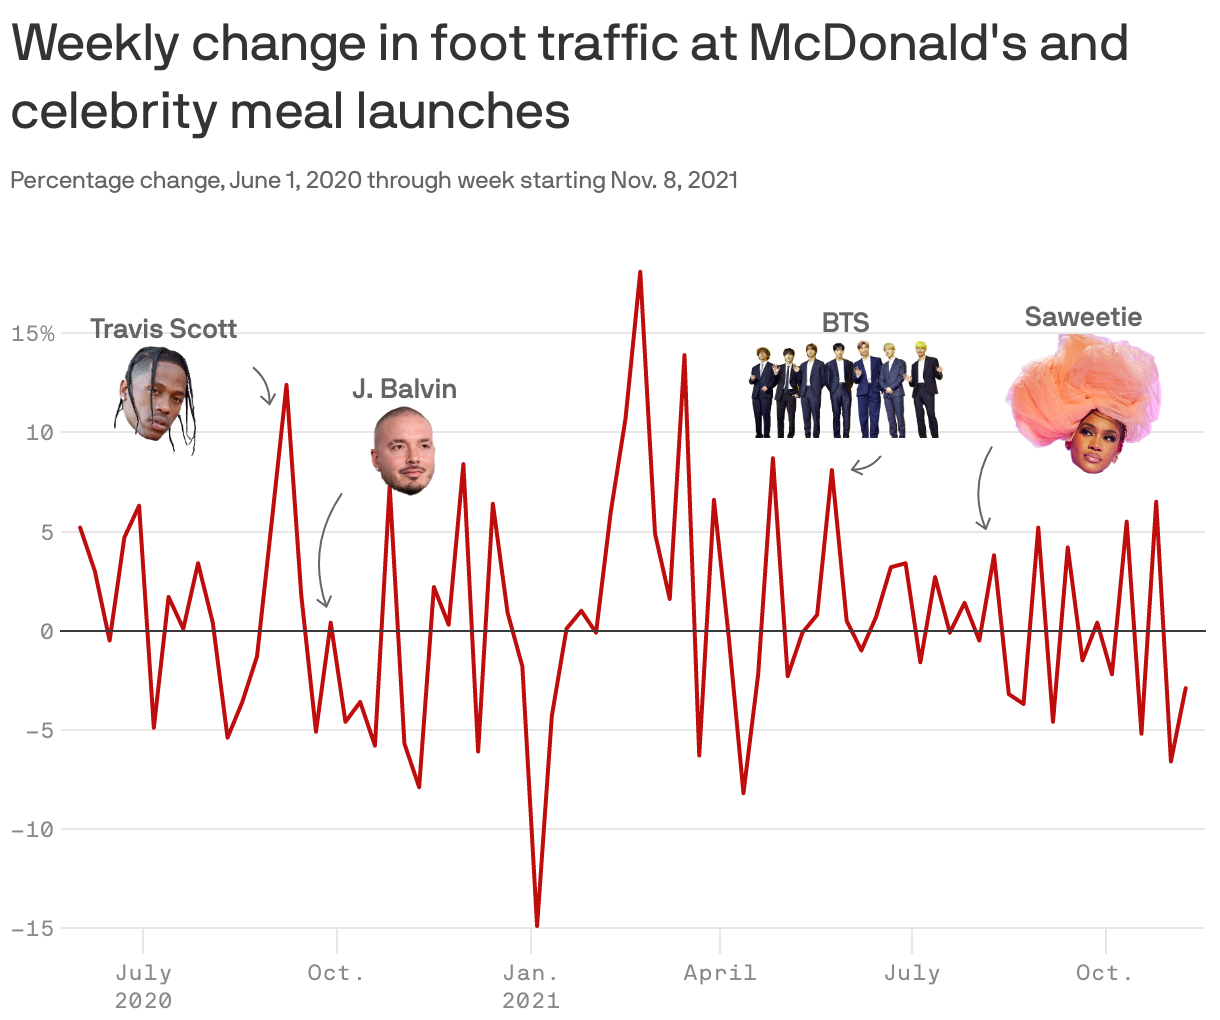 Weekly change in foot traffic at McDonald's and celebrity meal launches